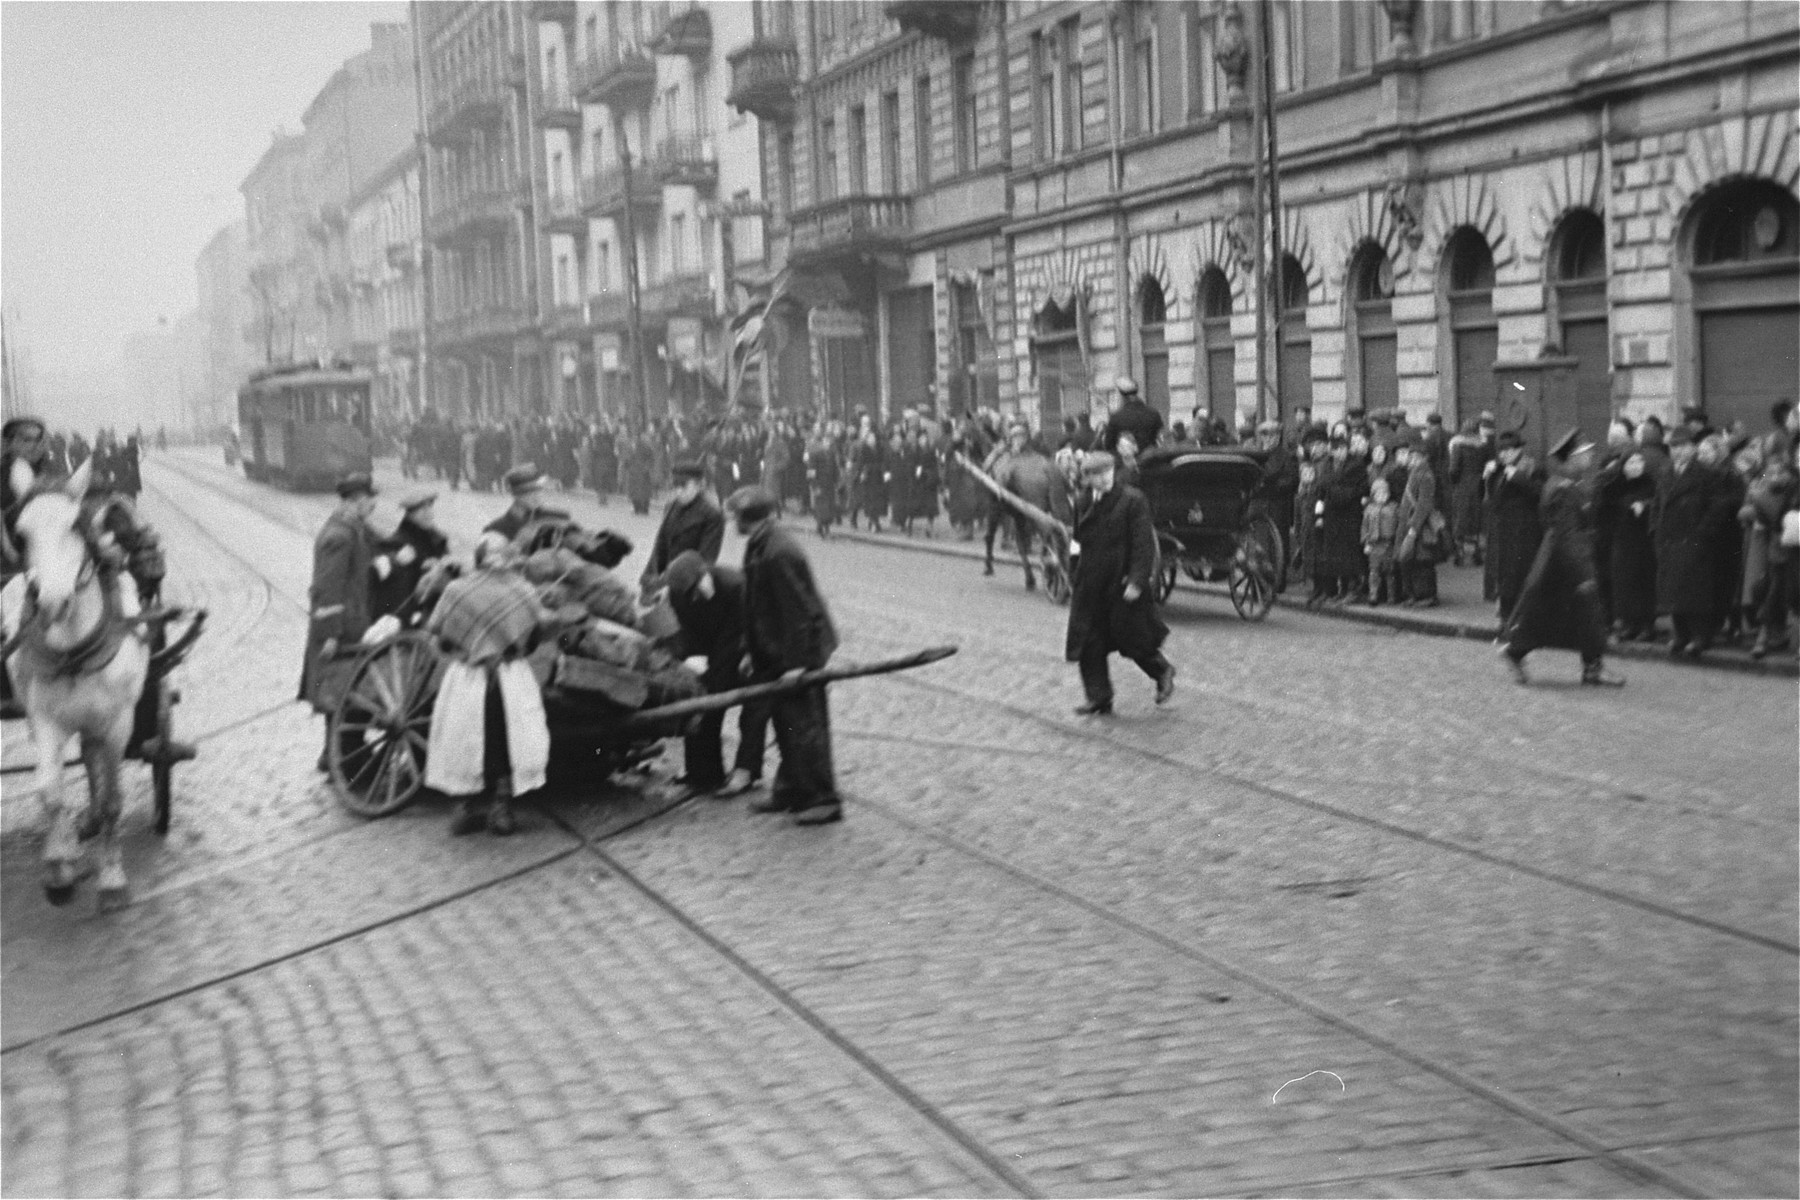 Jews attempt to repair a broken down wagon at the intersection of Nowolipki and Karmelicka Streets in the Warsaw ghetto.